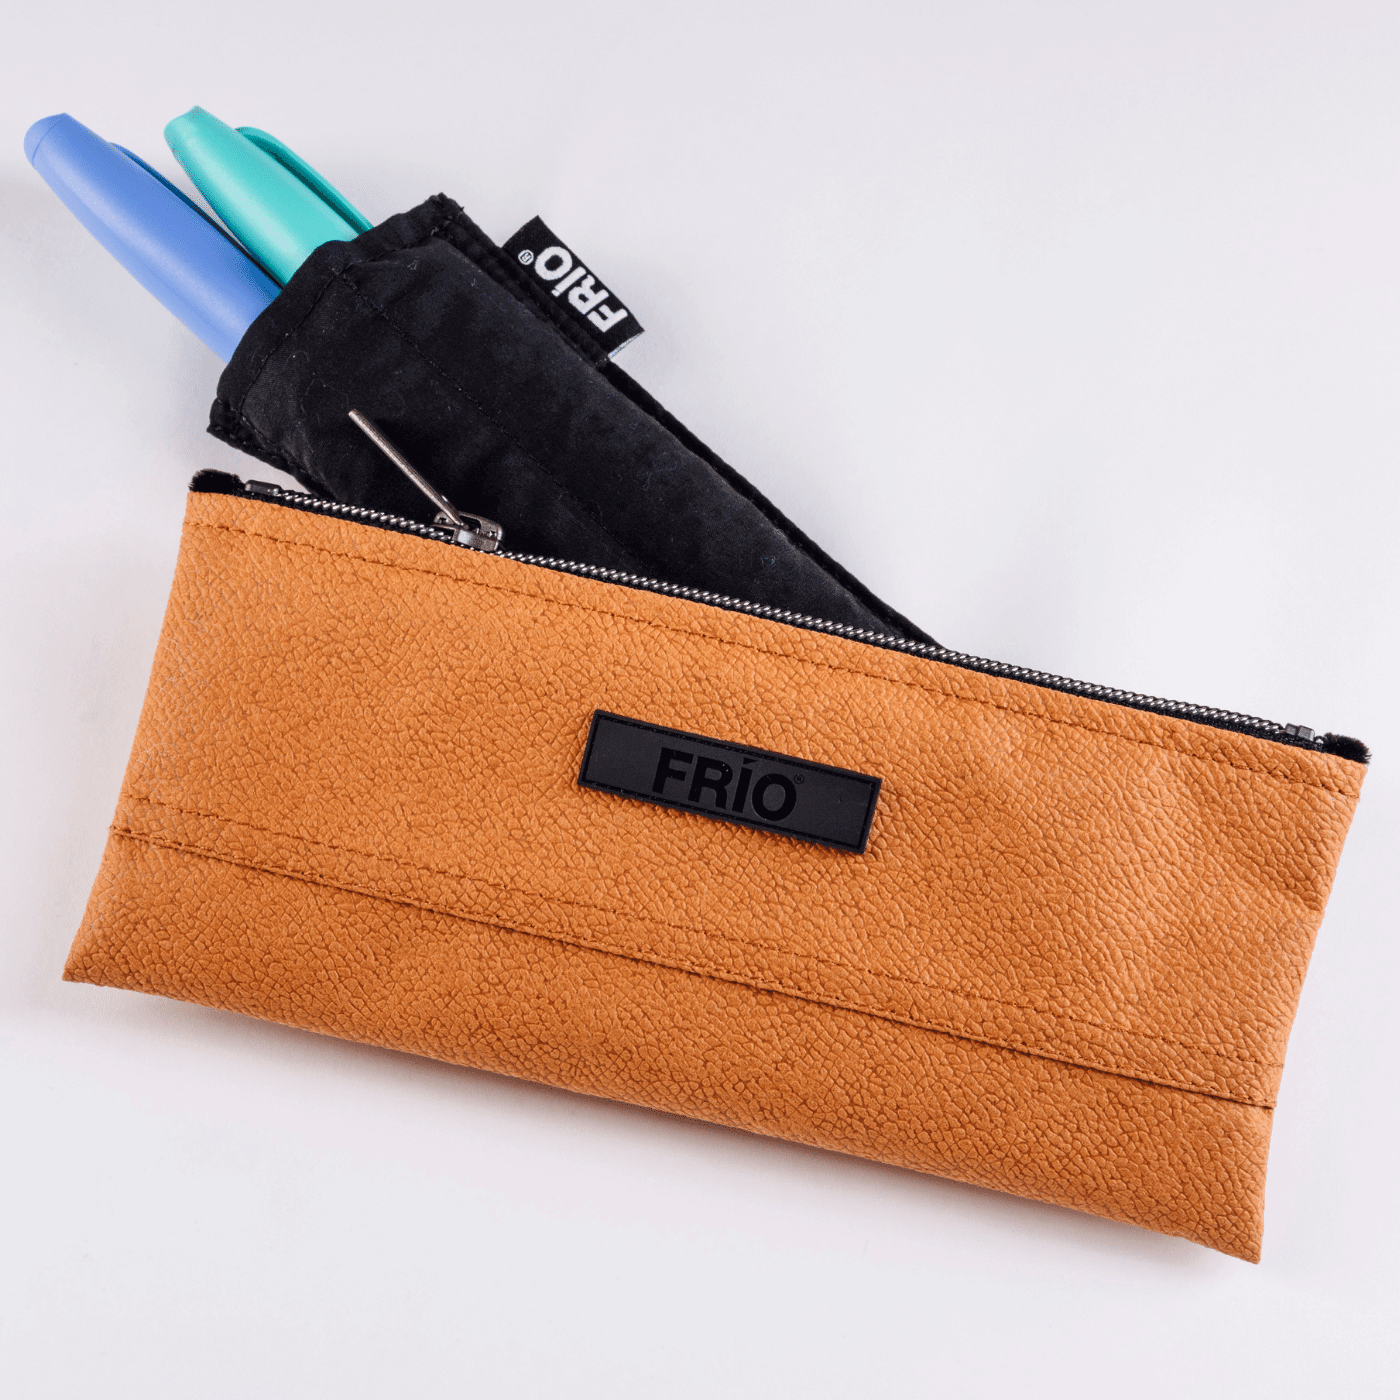 TP149 Frio Two Cooling Wallet Tan|TP149 Frio Two Cooling Wallet Tan|TP149 Frio Two Cooling Wallet Tan|TP149 Frio Two Cooling Wallet Tan|TP149 Frio Two Cooling Wallet Tan